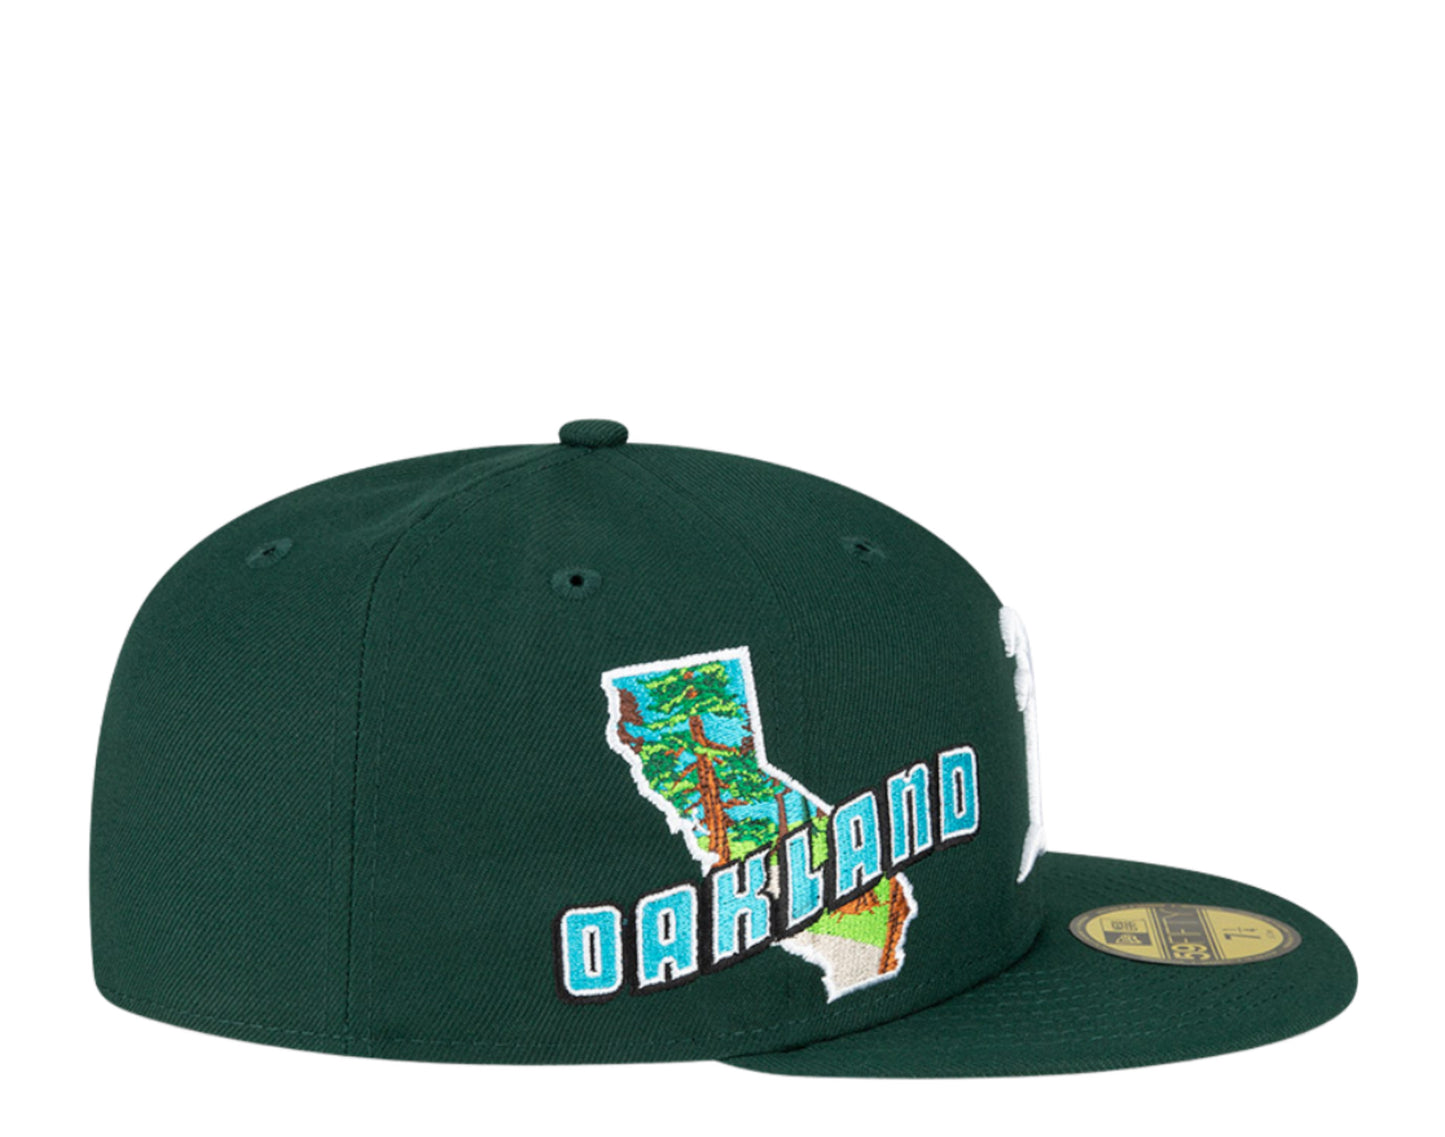 New Era 59Fifty MLB Oakland Athletics Stateview Fitted Hat